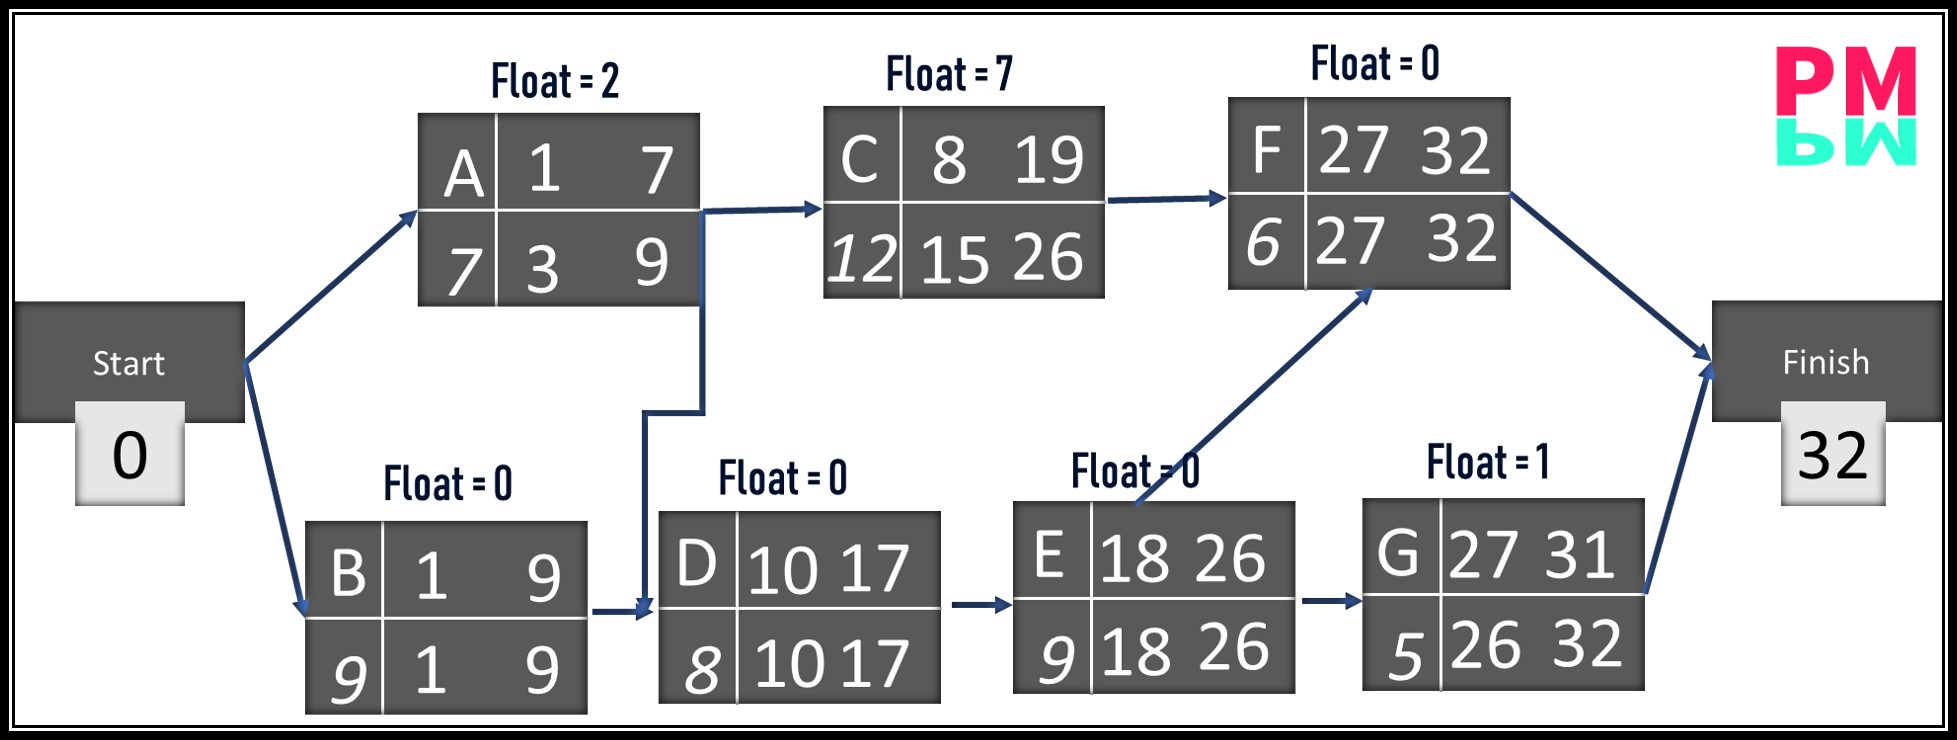 Float Calculation in CPM